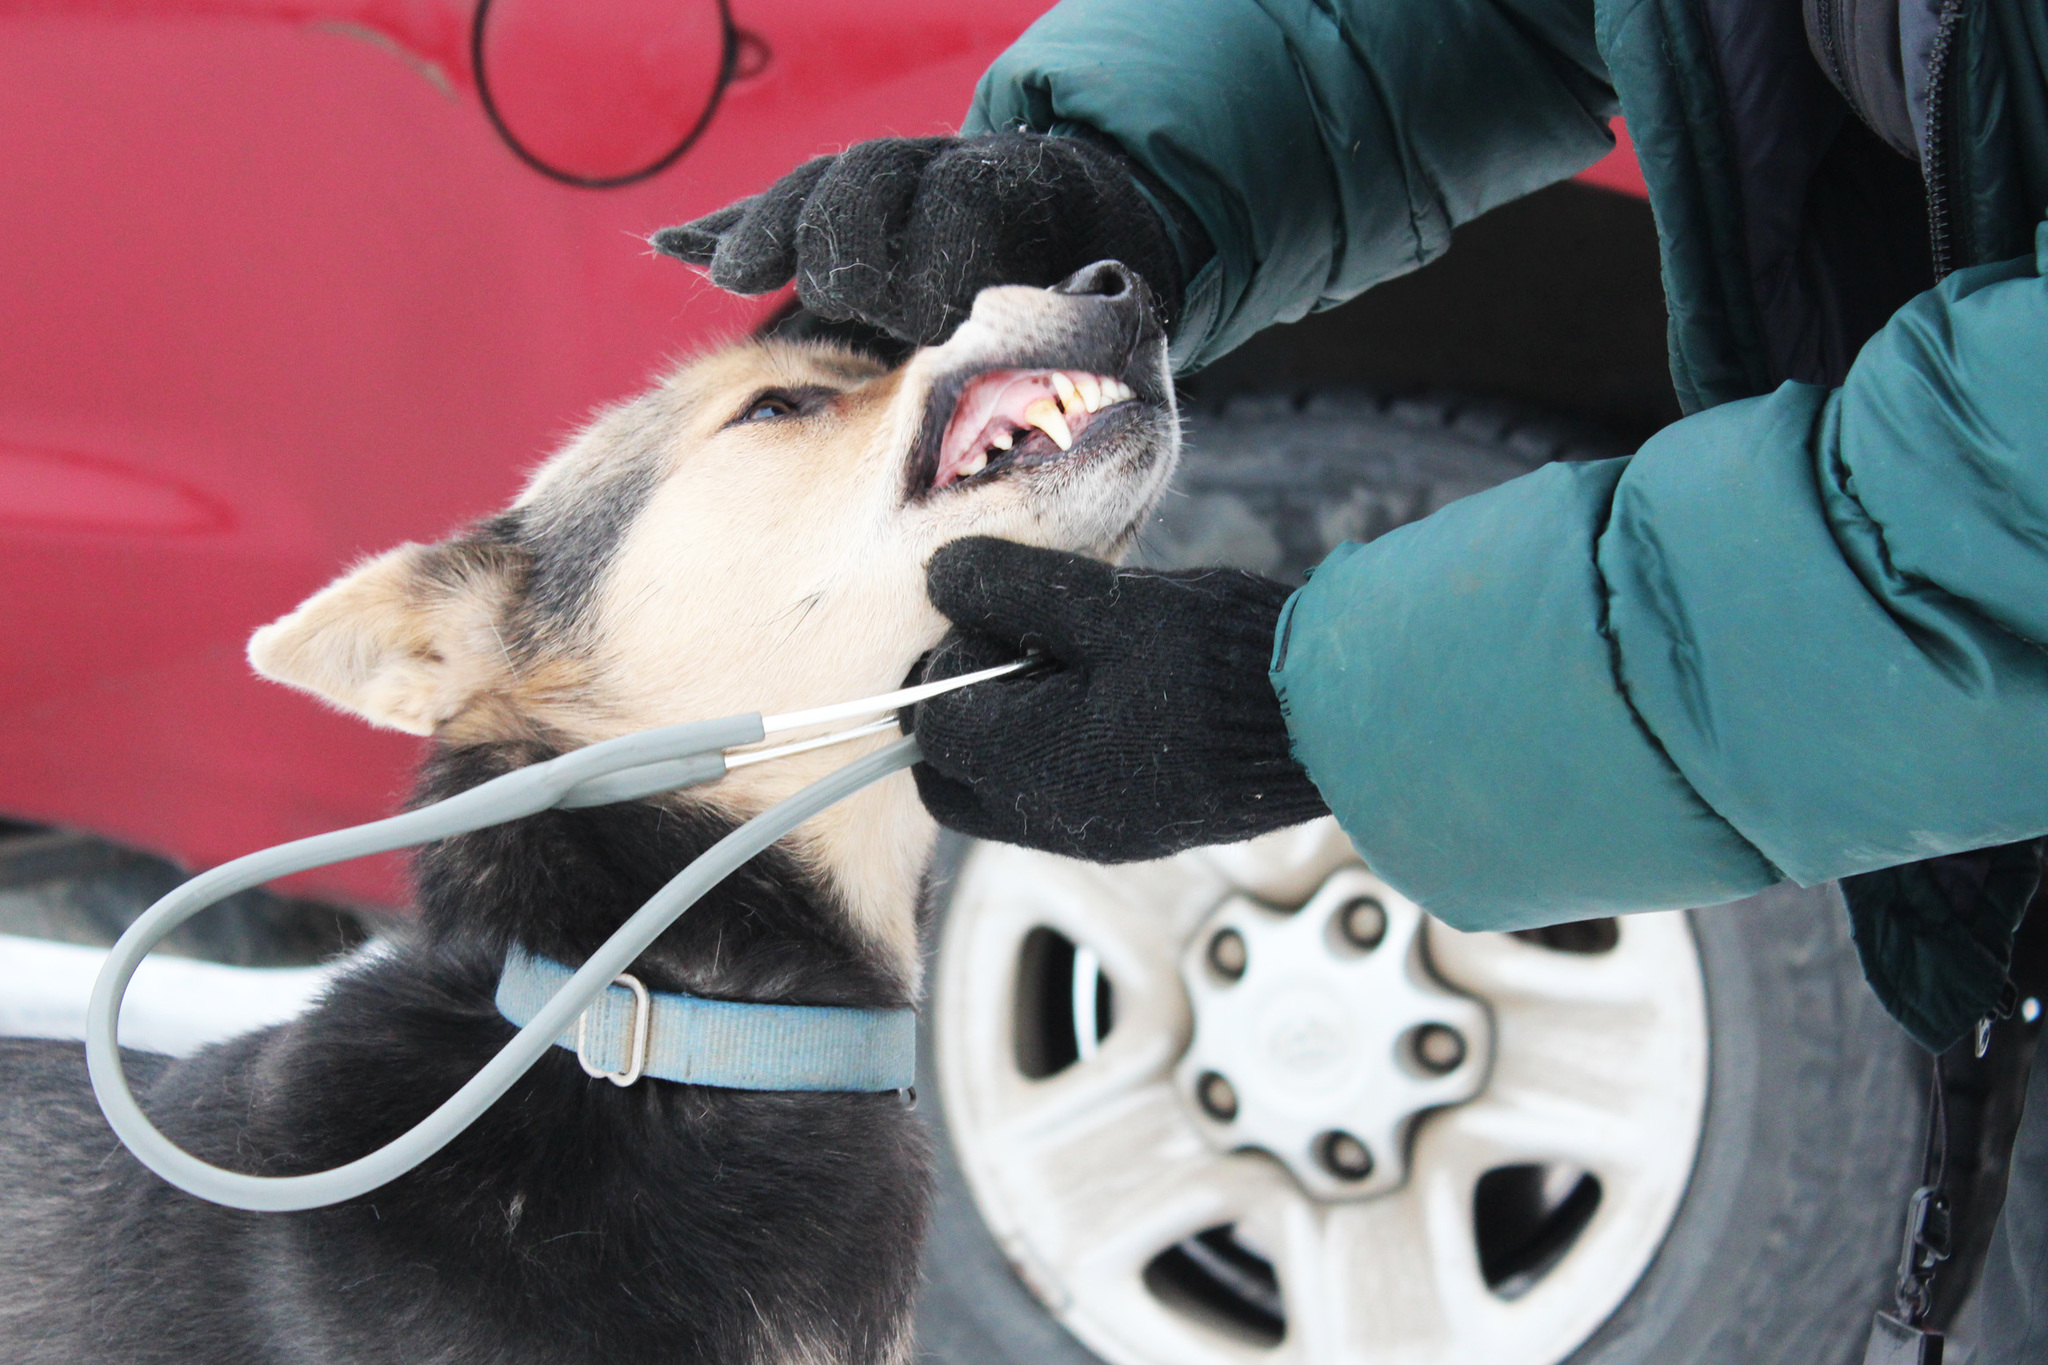 A sled dog named Willow waits while a veterinarian examines her teeth during vet checks Friday, Jan. 27, 2017 at the Soldotna Regional Sports Complex in Soldotna, Alaska. Mushers brought their teams into the complex parking lot for final health checks before taking off in the Tustumena 200 Sled Dog Race through the Caribou Hills on Saturday. (Megan Pacer/Peninsula Clarion)